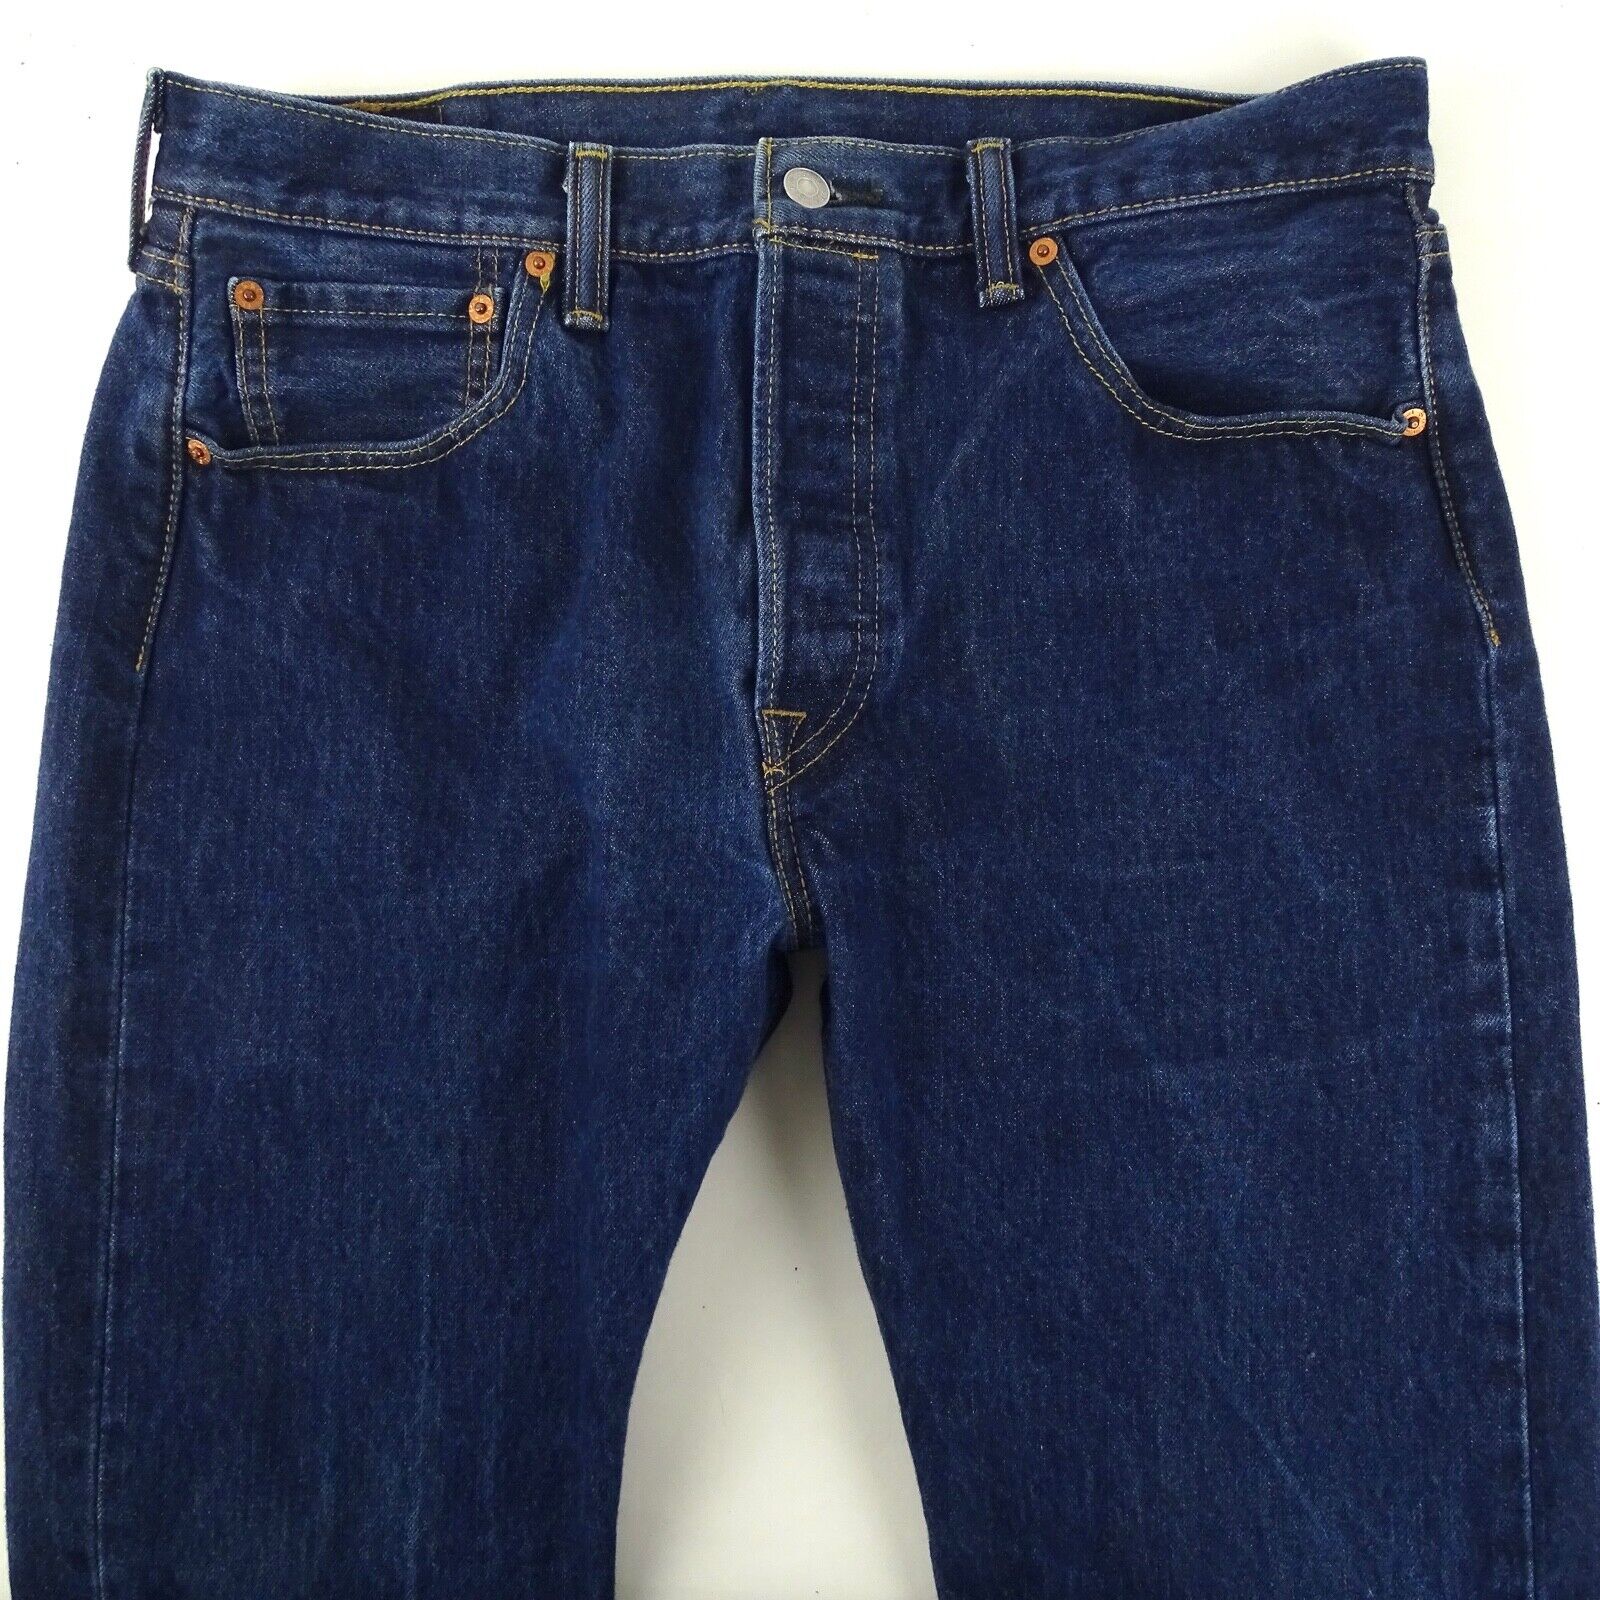 Levis 501 Straight Leg Button Fly All Cotton Jeans Mens W34 x L31.5 Measured